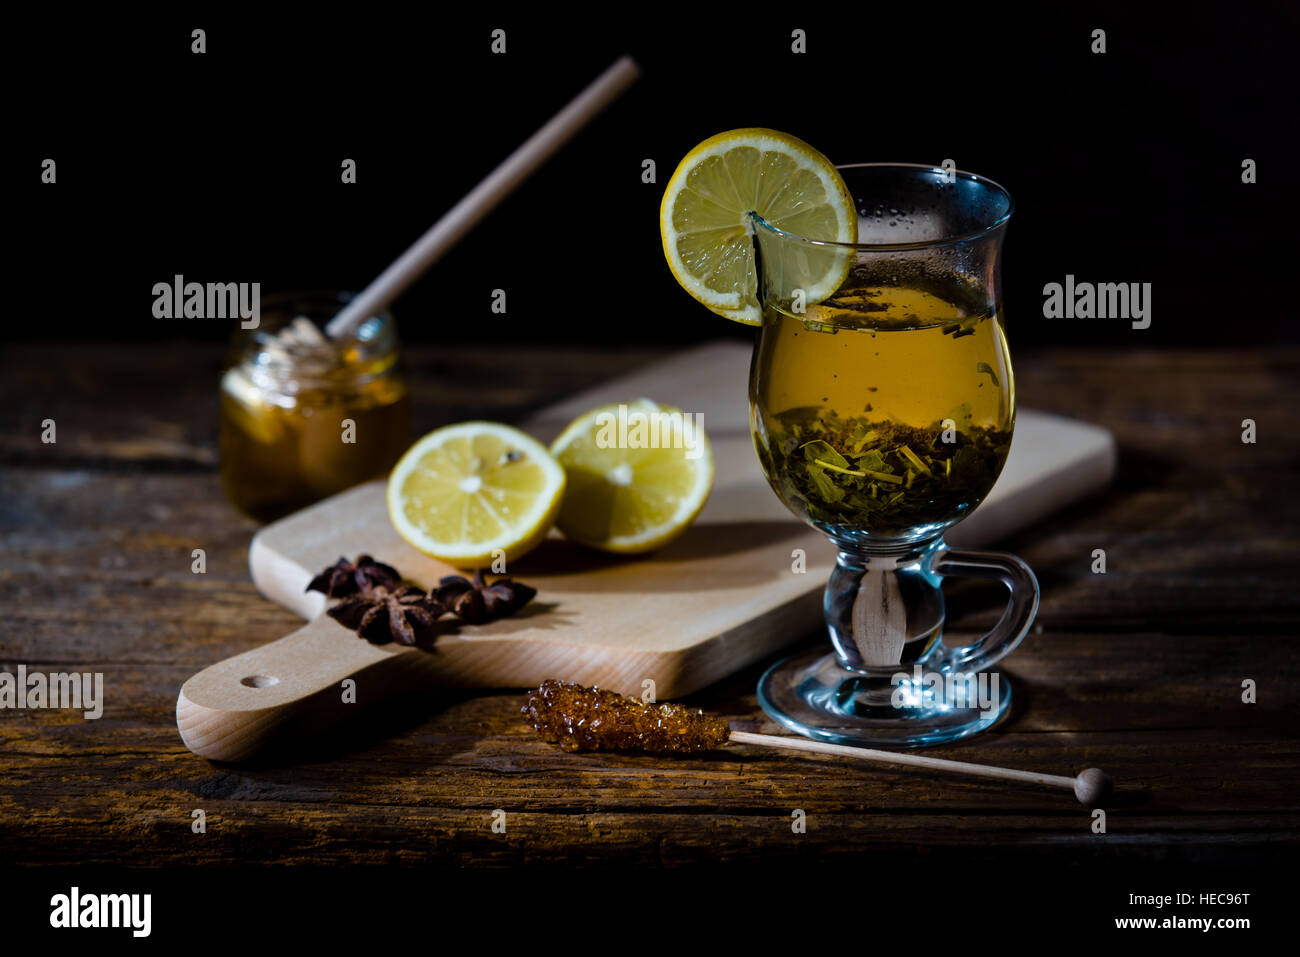 Natural medicones against flue and cold. Honey, lemon, hot tea, onion and garlic. Health concept. Stock Photo